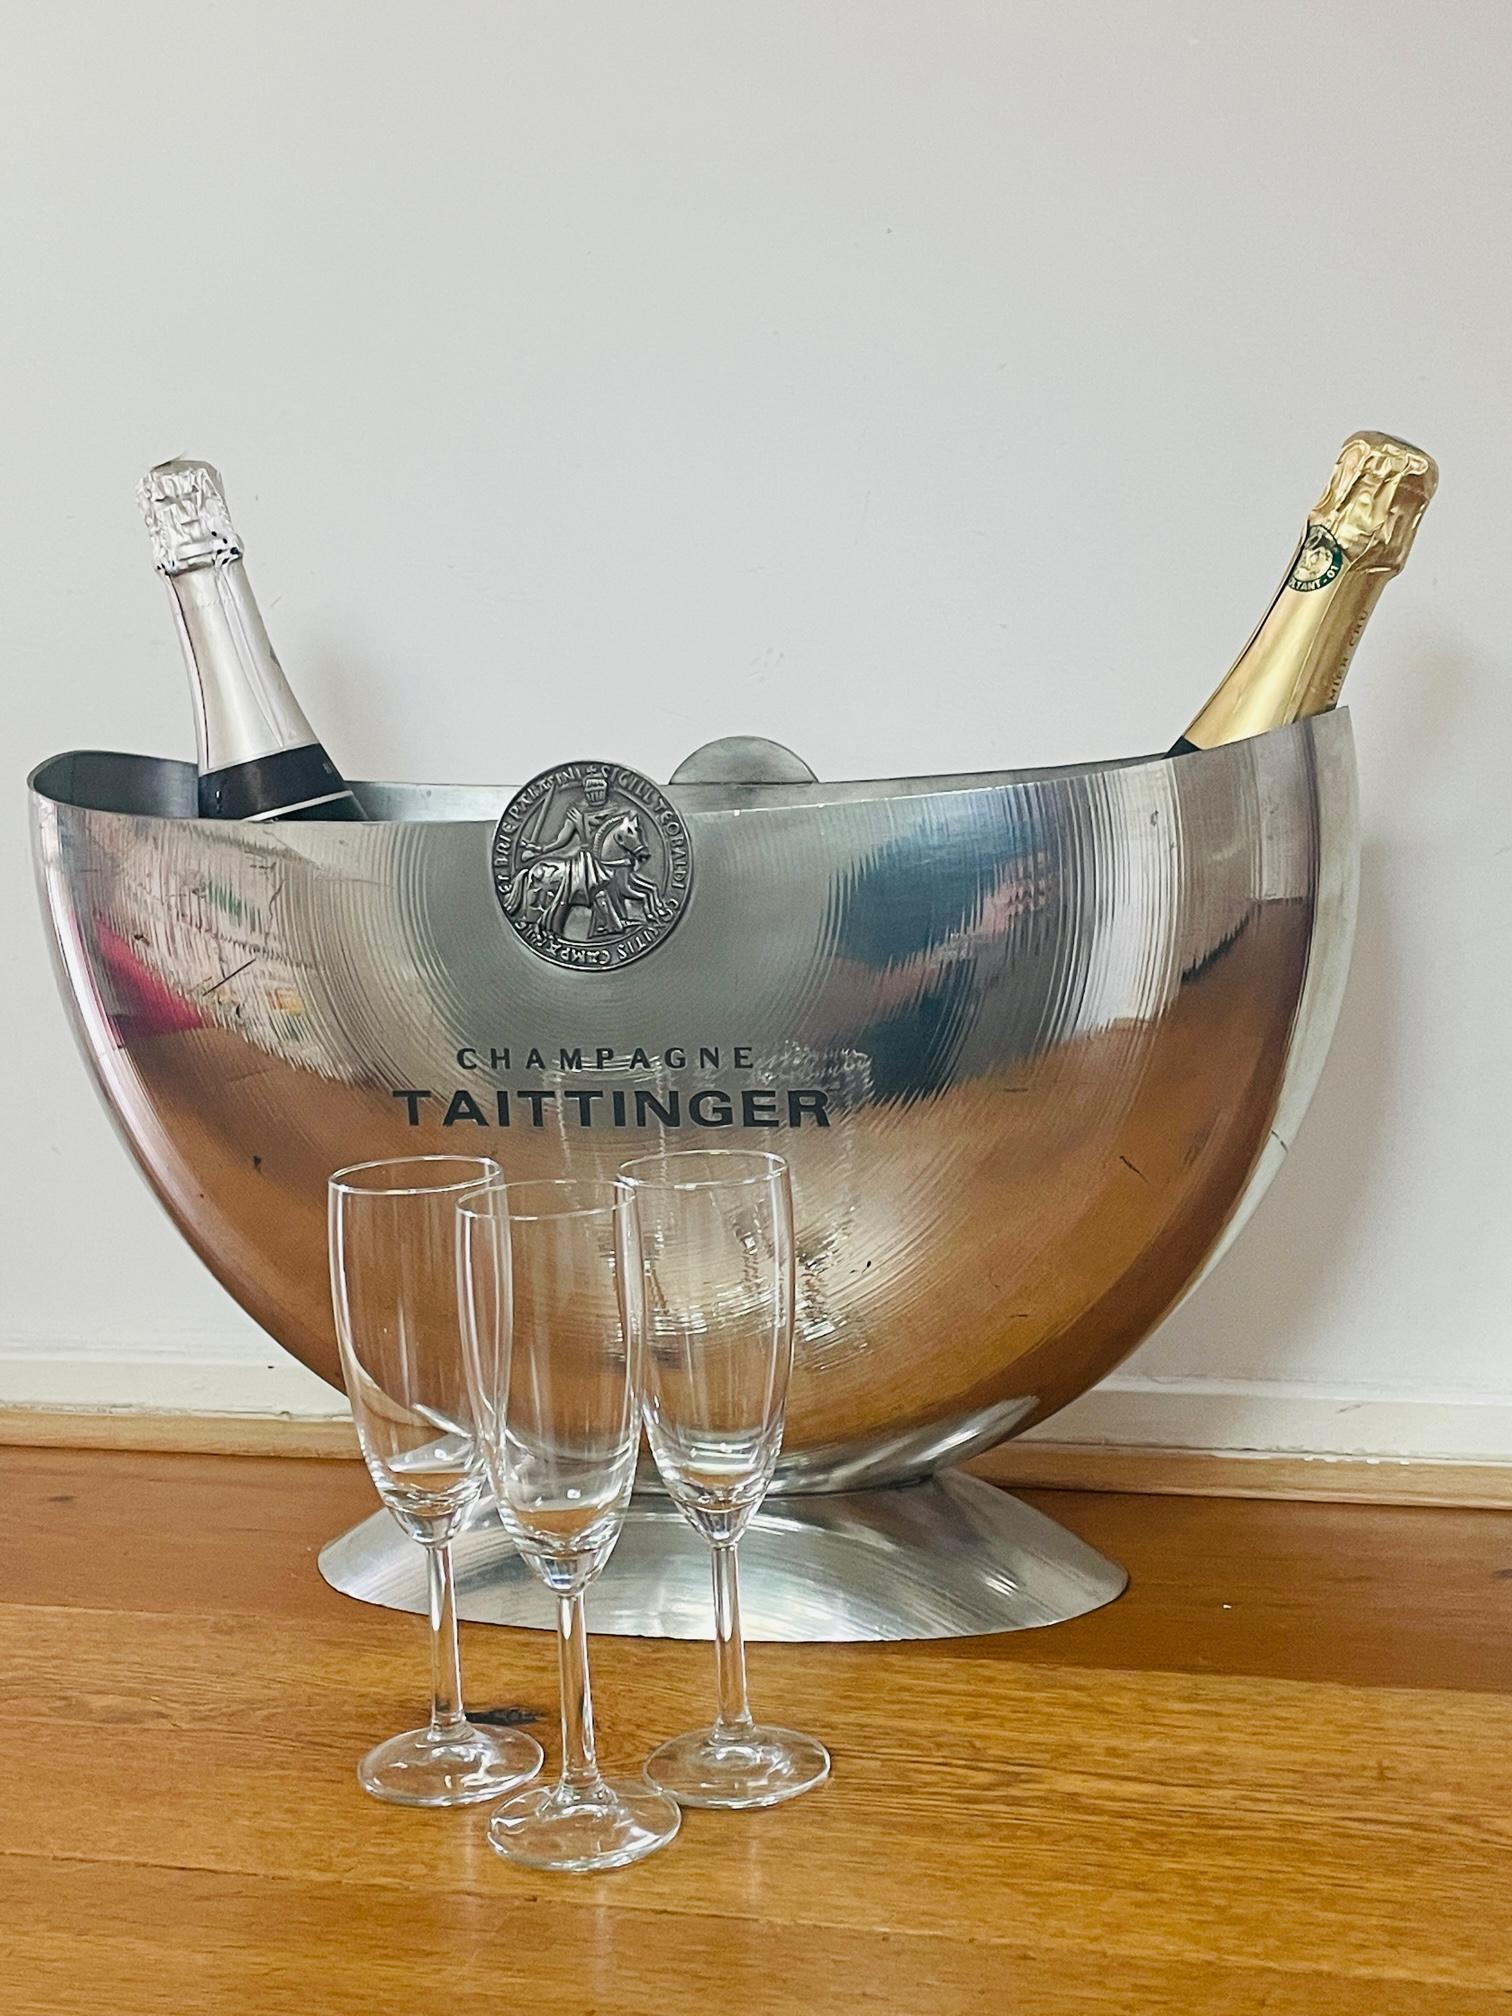 Pewter Taittinger half-moon Champagne bowl. Beautiful pewter champagne cooler by Etain